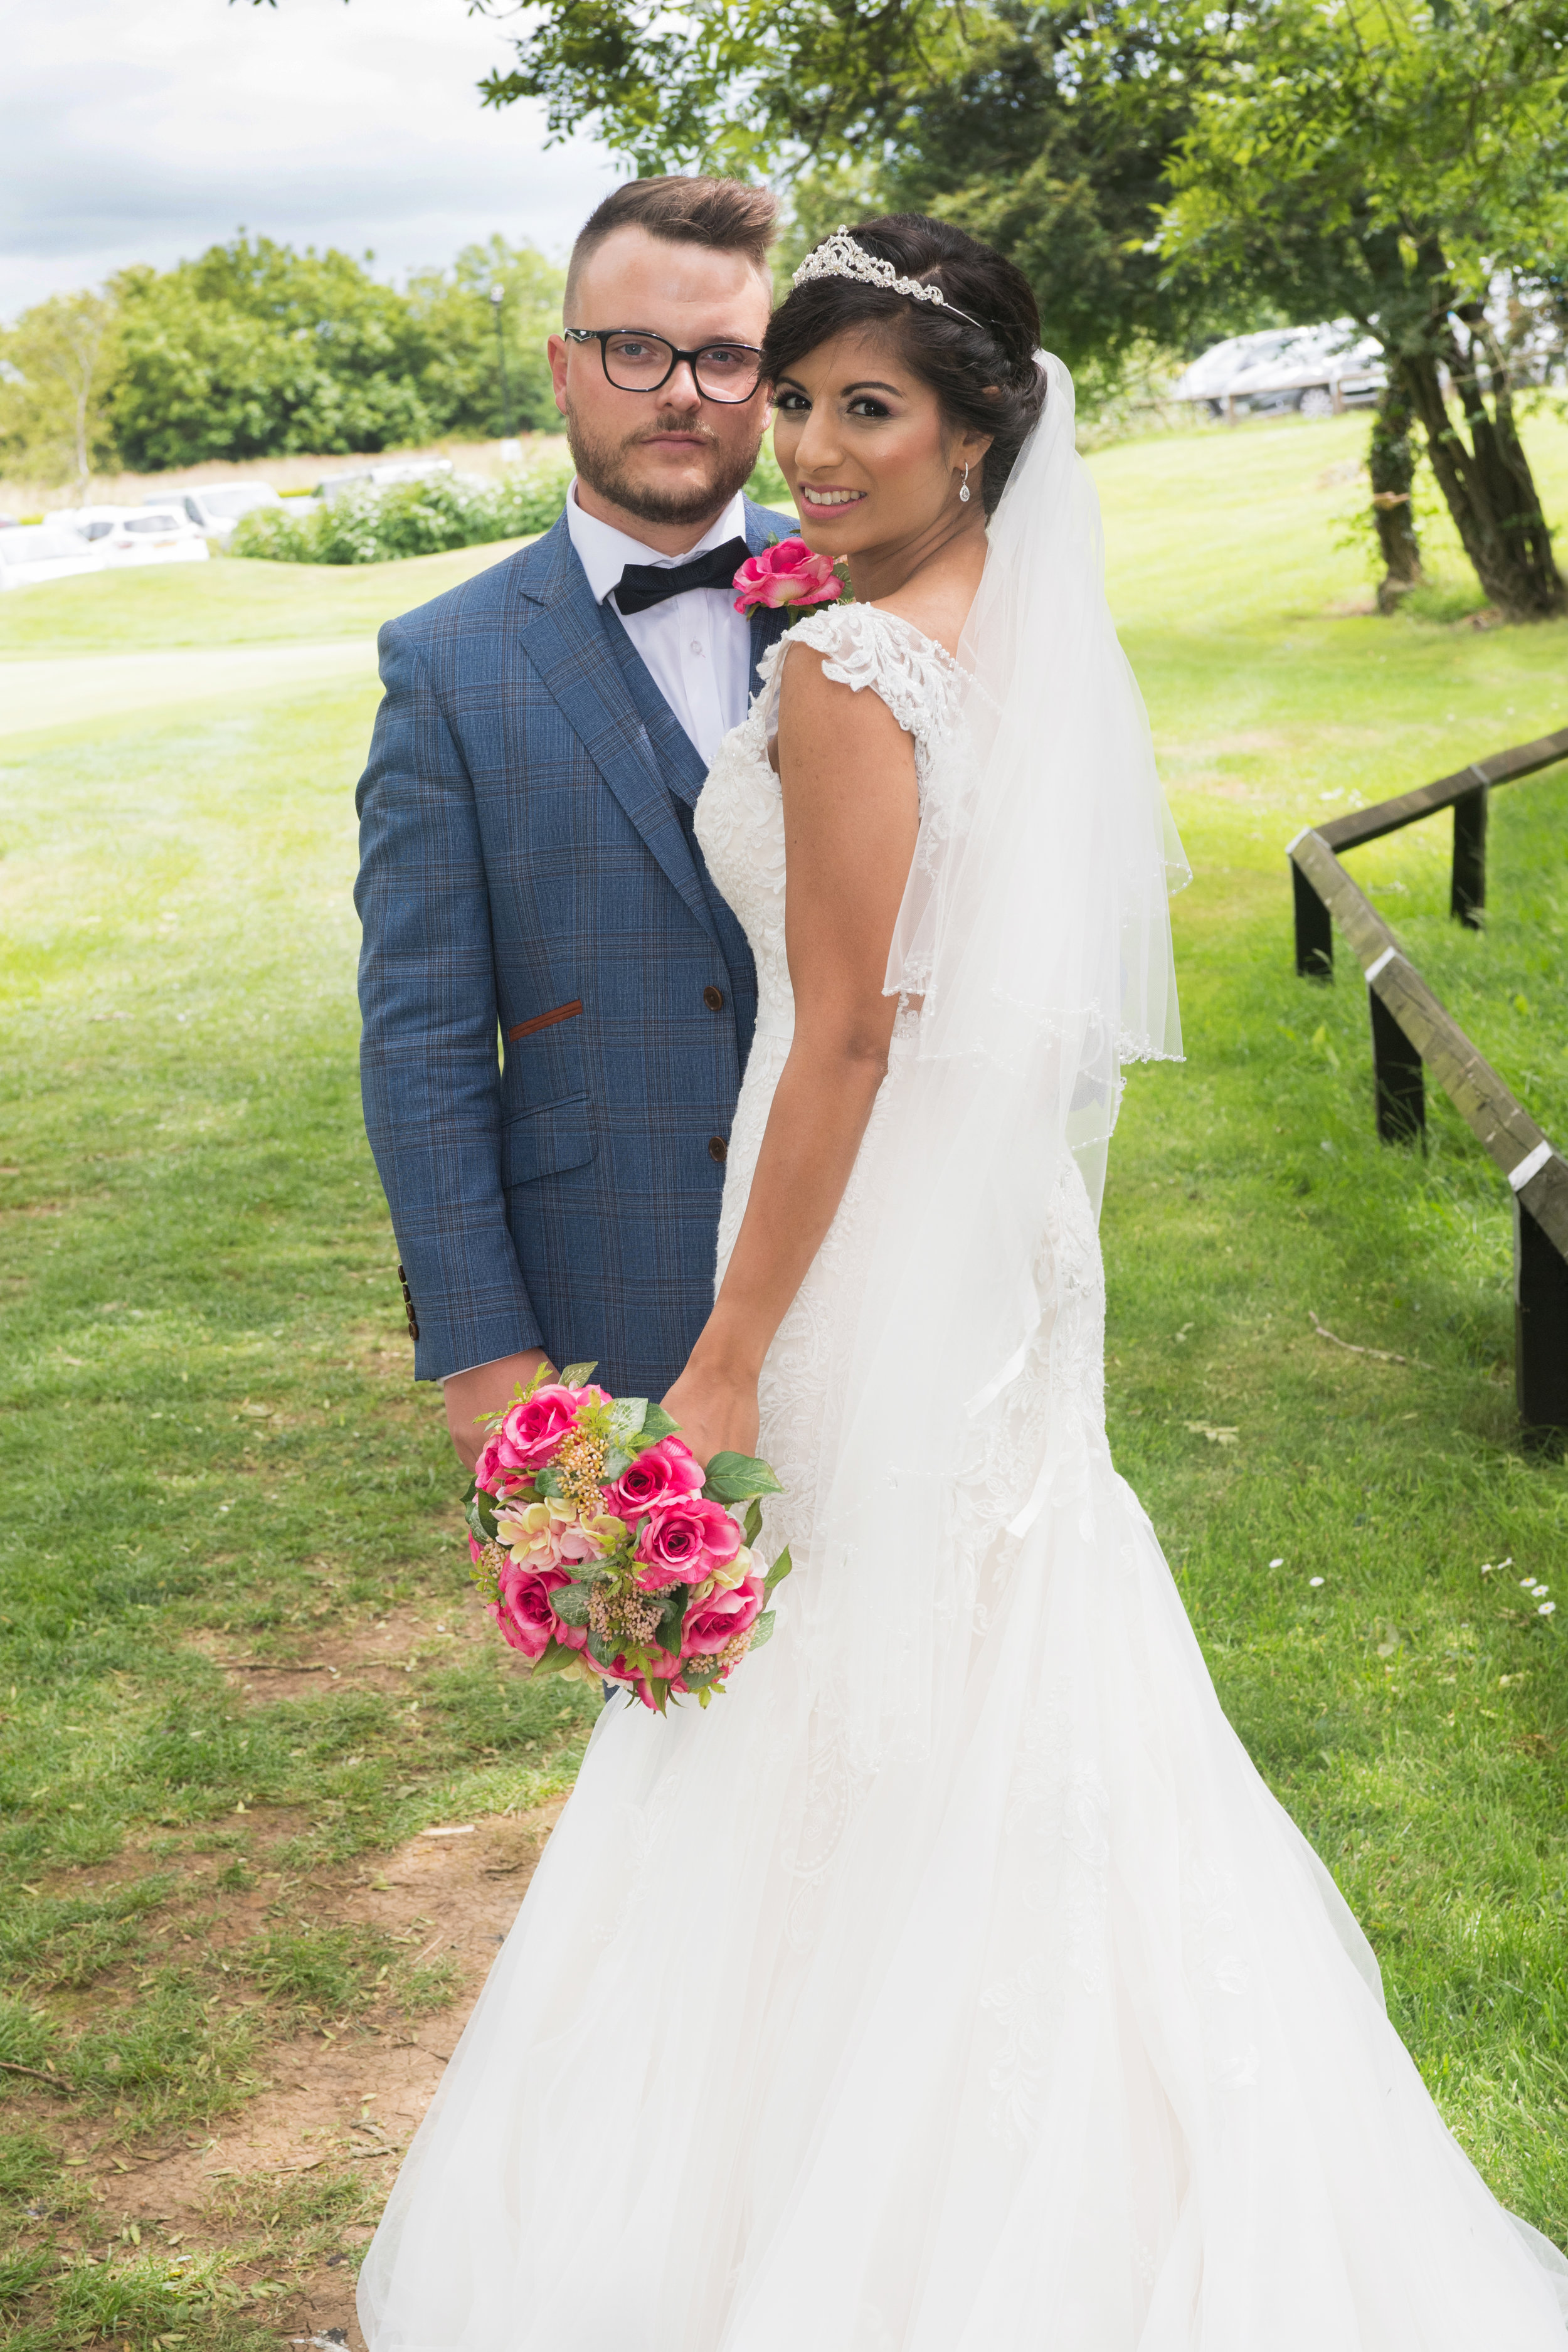 Bride and Groom photo session Staverton Park Daventry